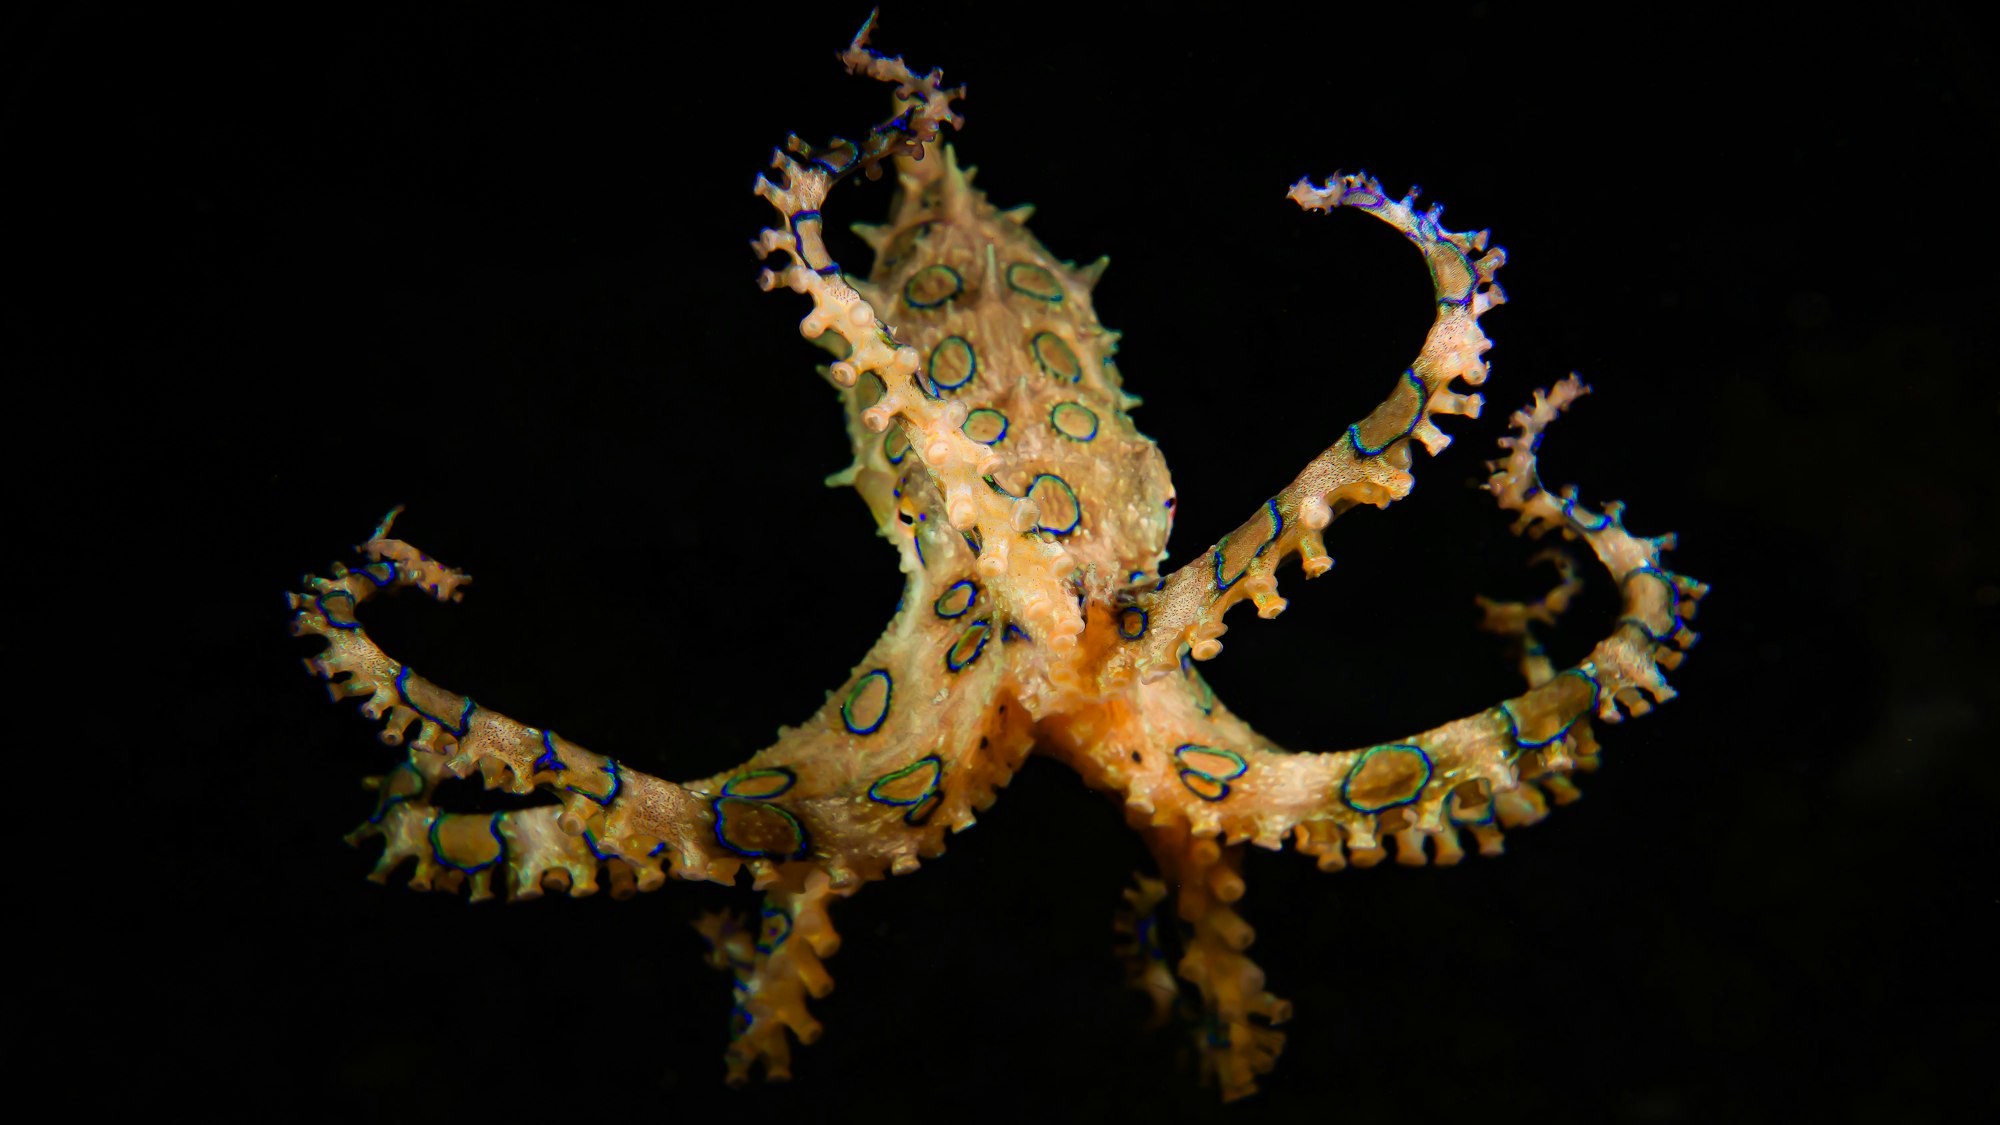 Blue-Ringed Octopus (Hapalochlaena sp.)

The blue-ringed octopus flashes its 50-60 rings within a third of a second as a warning display to predators. Being one of the world's most venomous marine animals, its poison causes total body paralysis - also to humans.